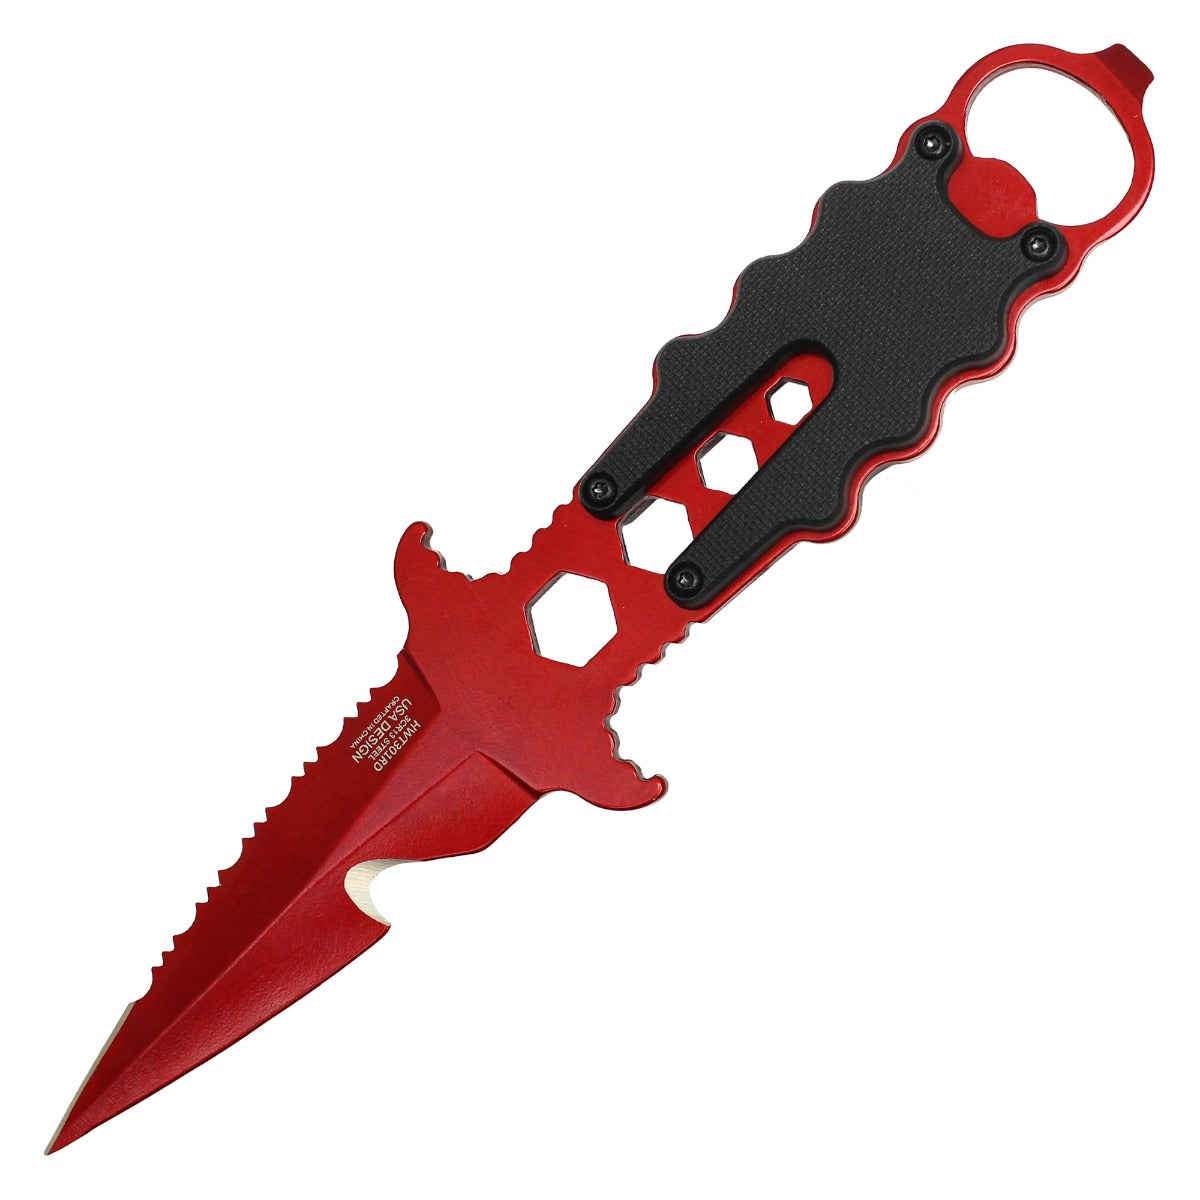 7.5" Red Fixed Blade Knife